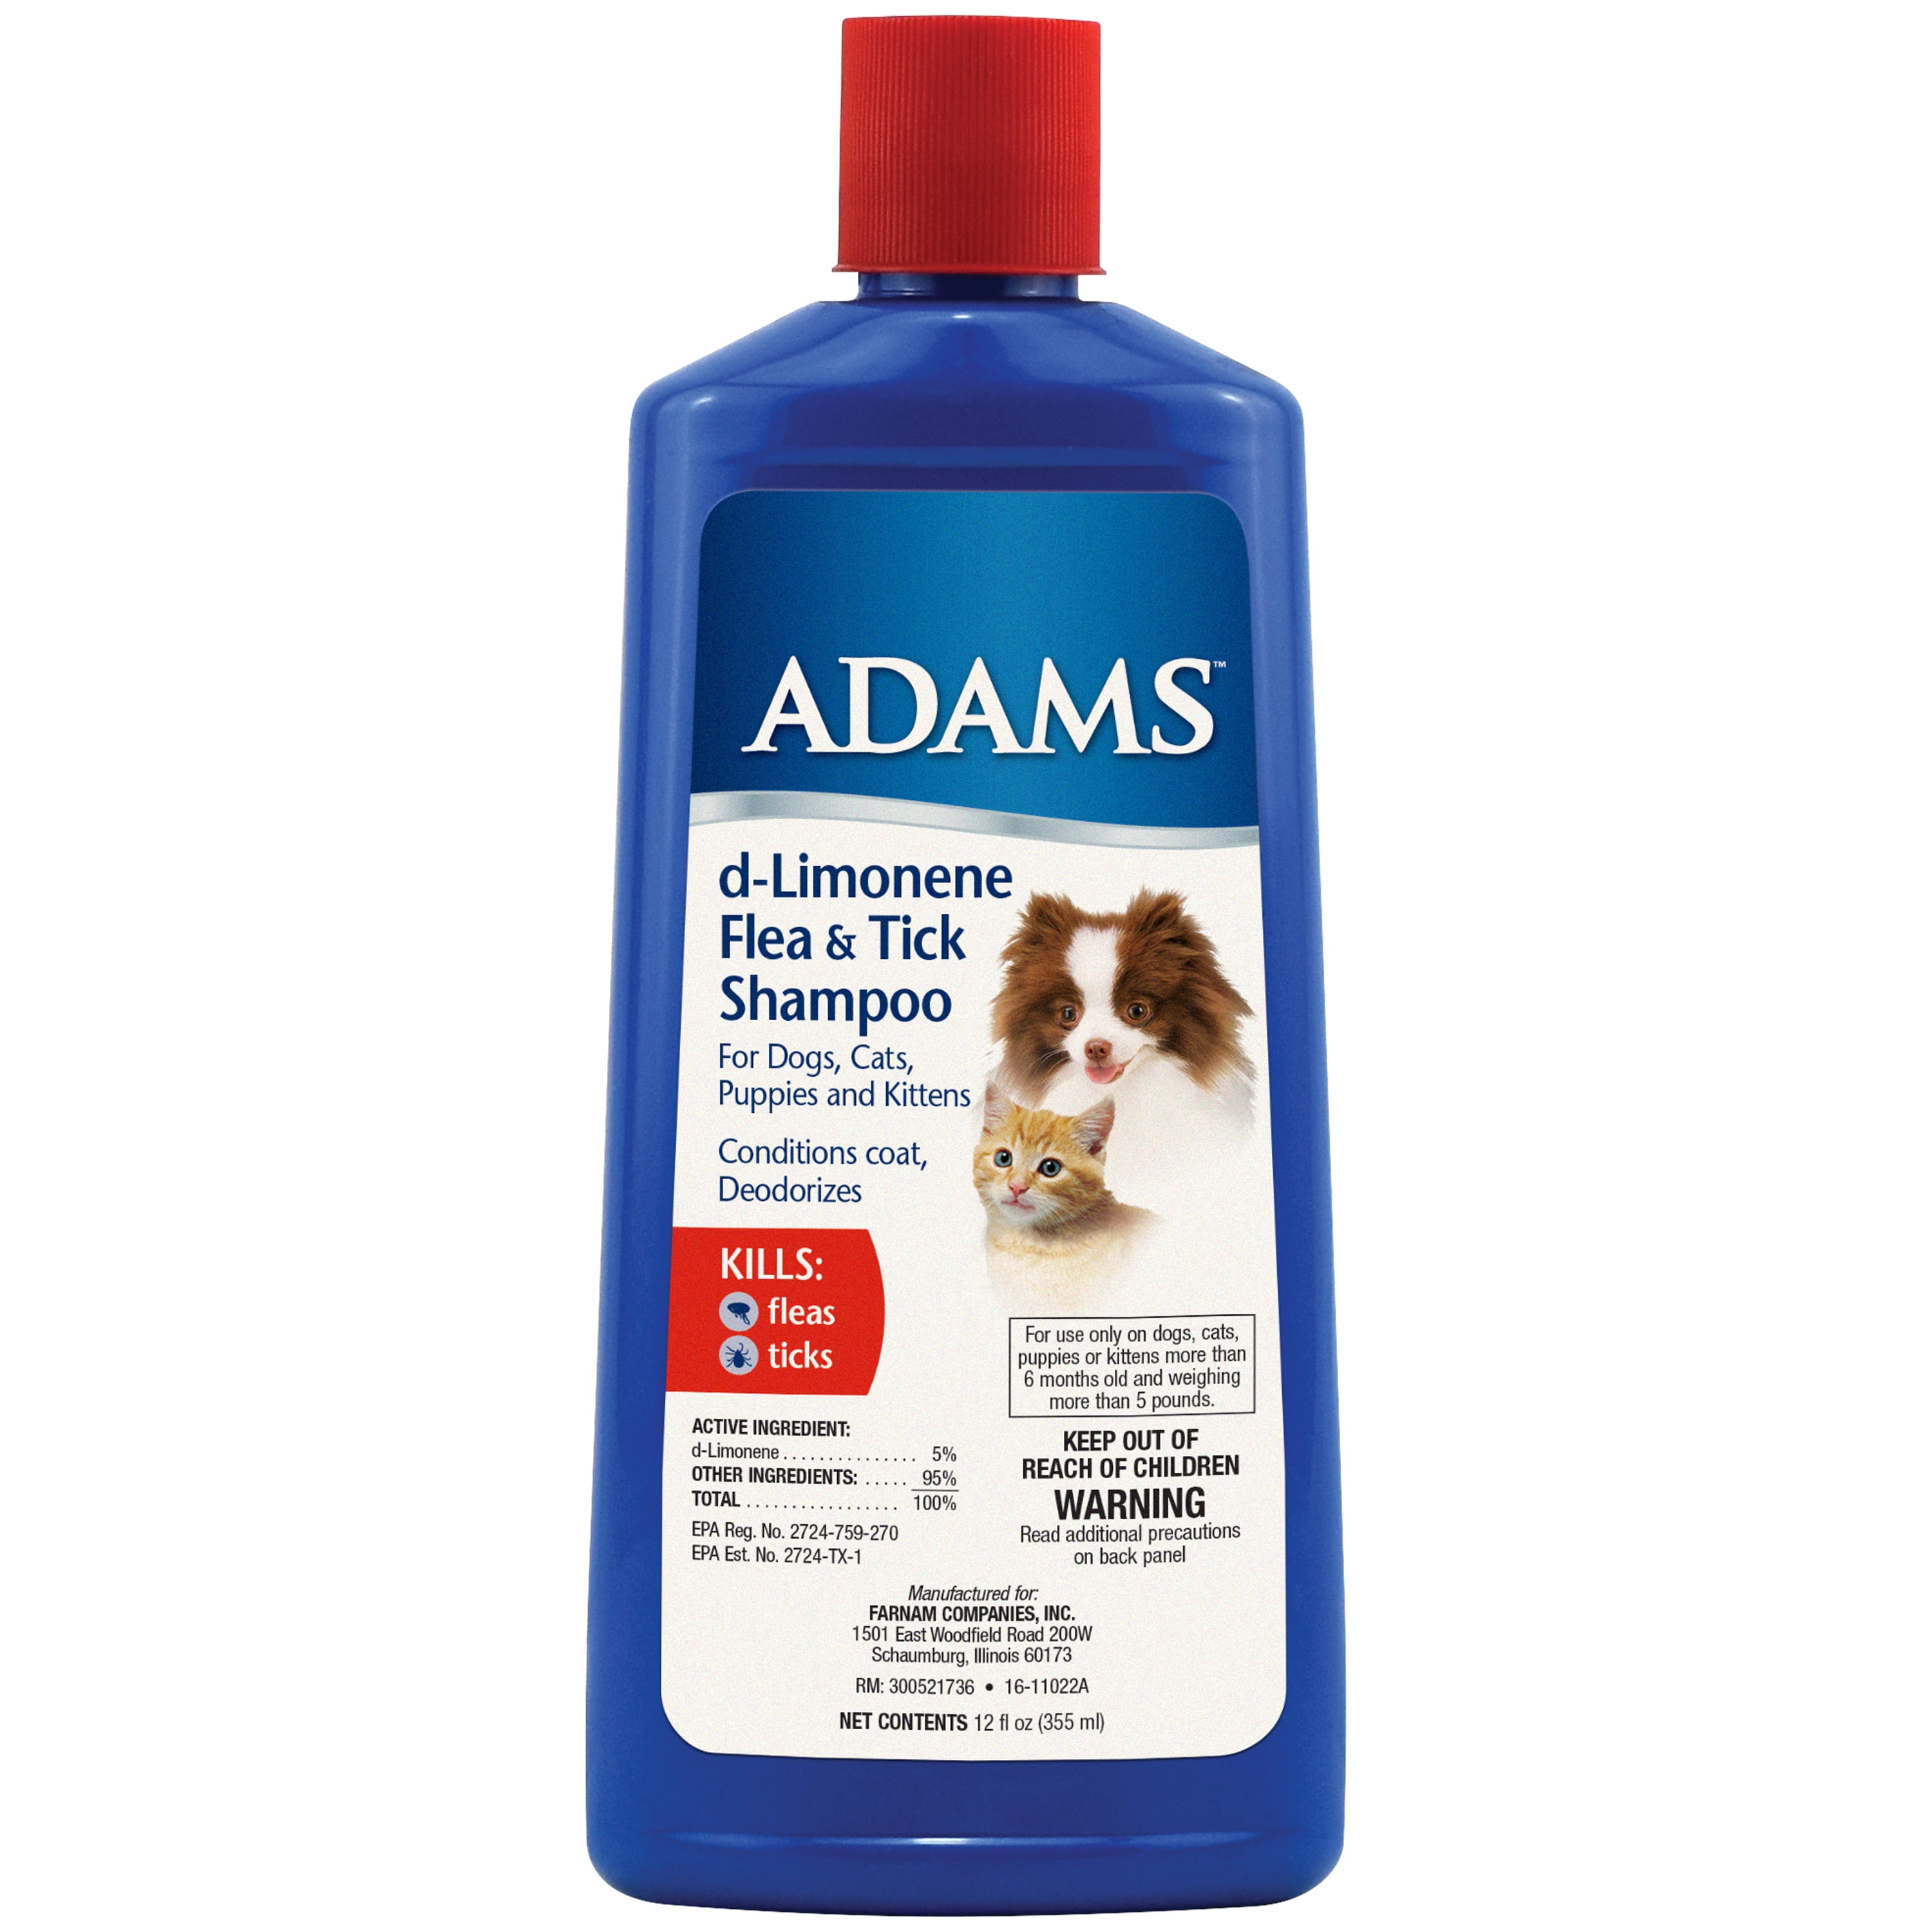 Adams Flea & Tick Control Shampoo for Cats and Dogs with dLimonene 12